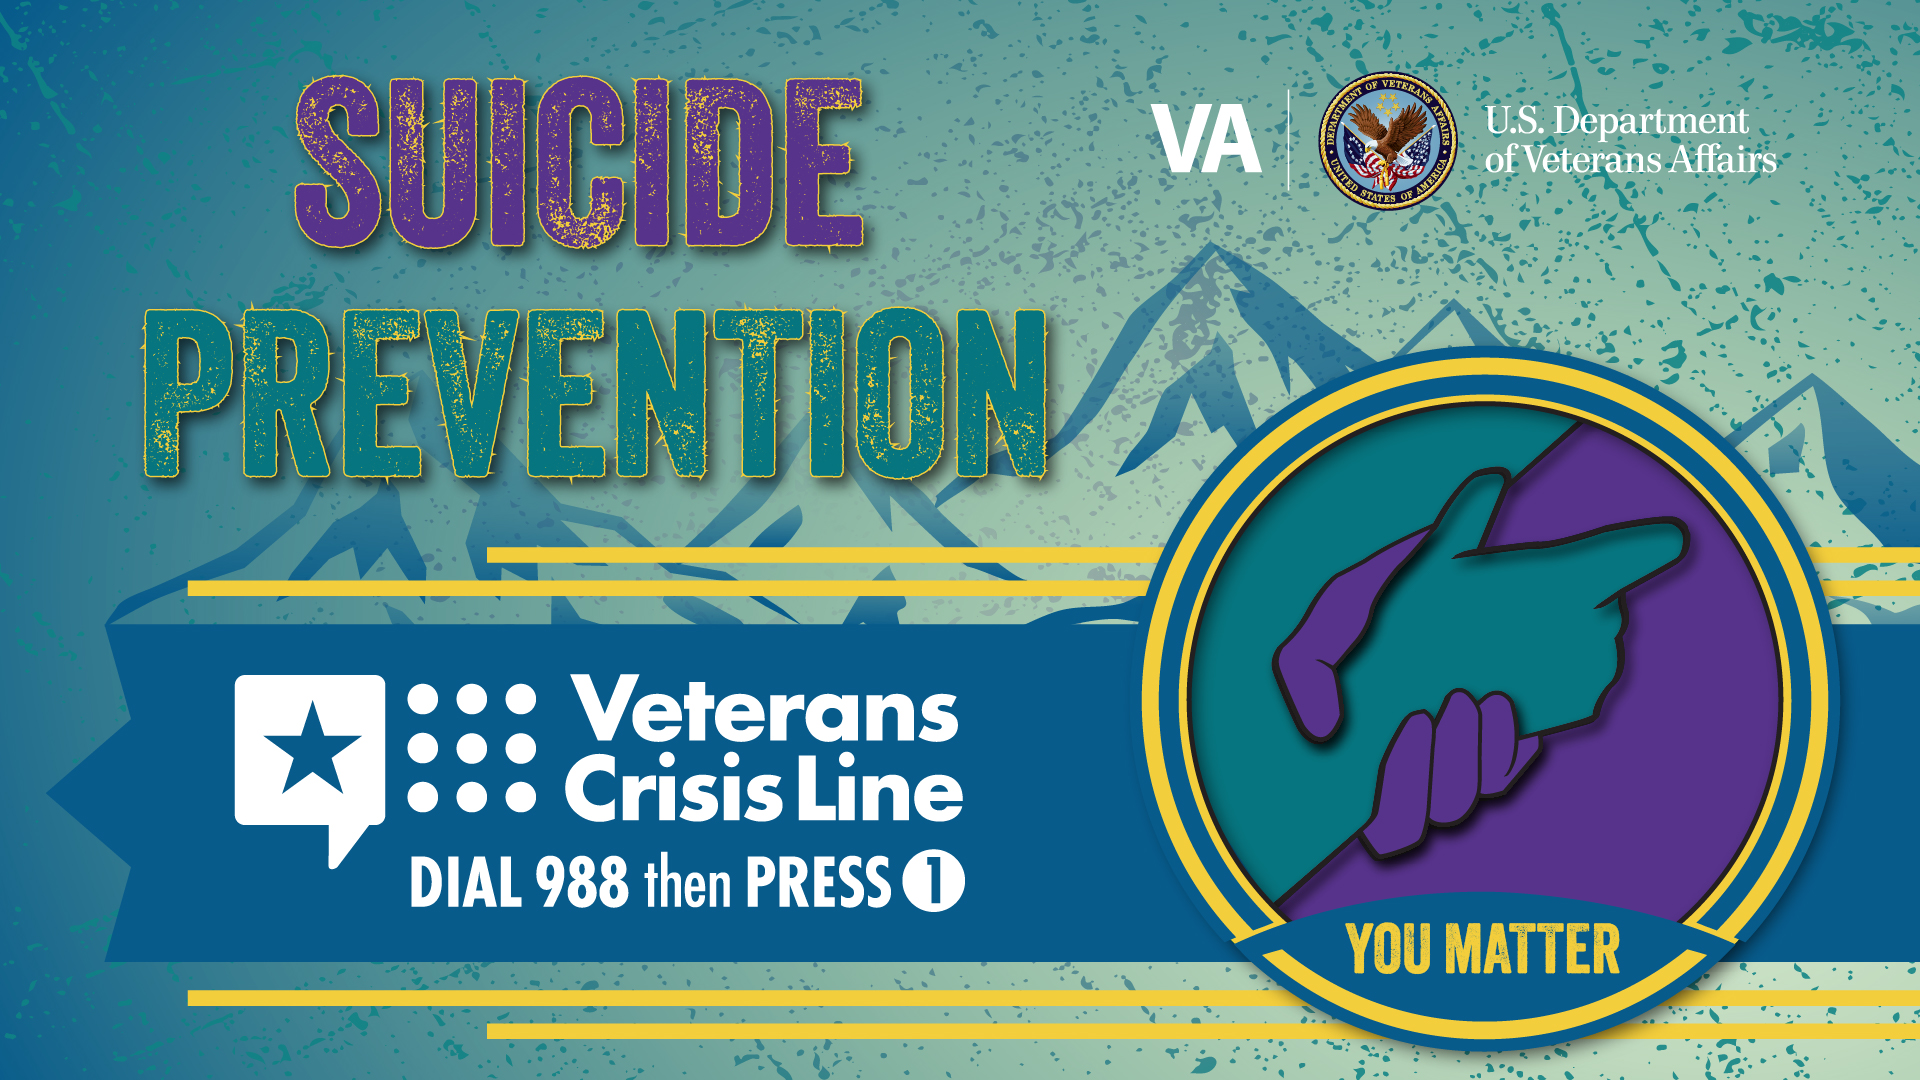 Large Web Banner for Suicide Prevention Month